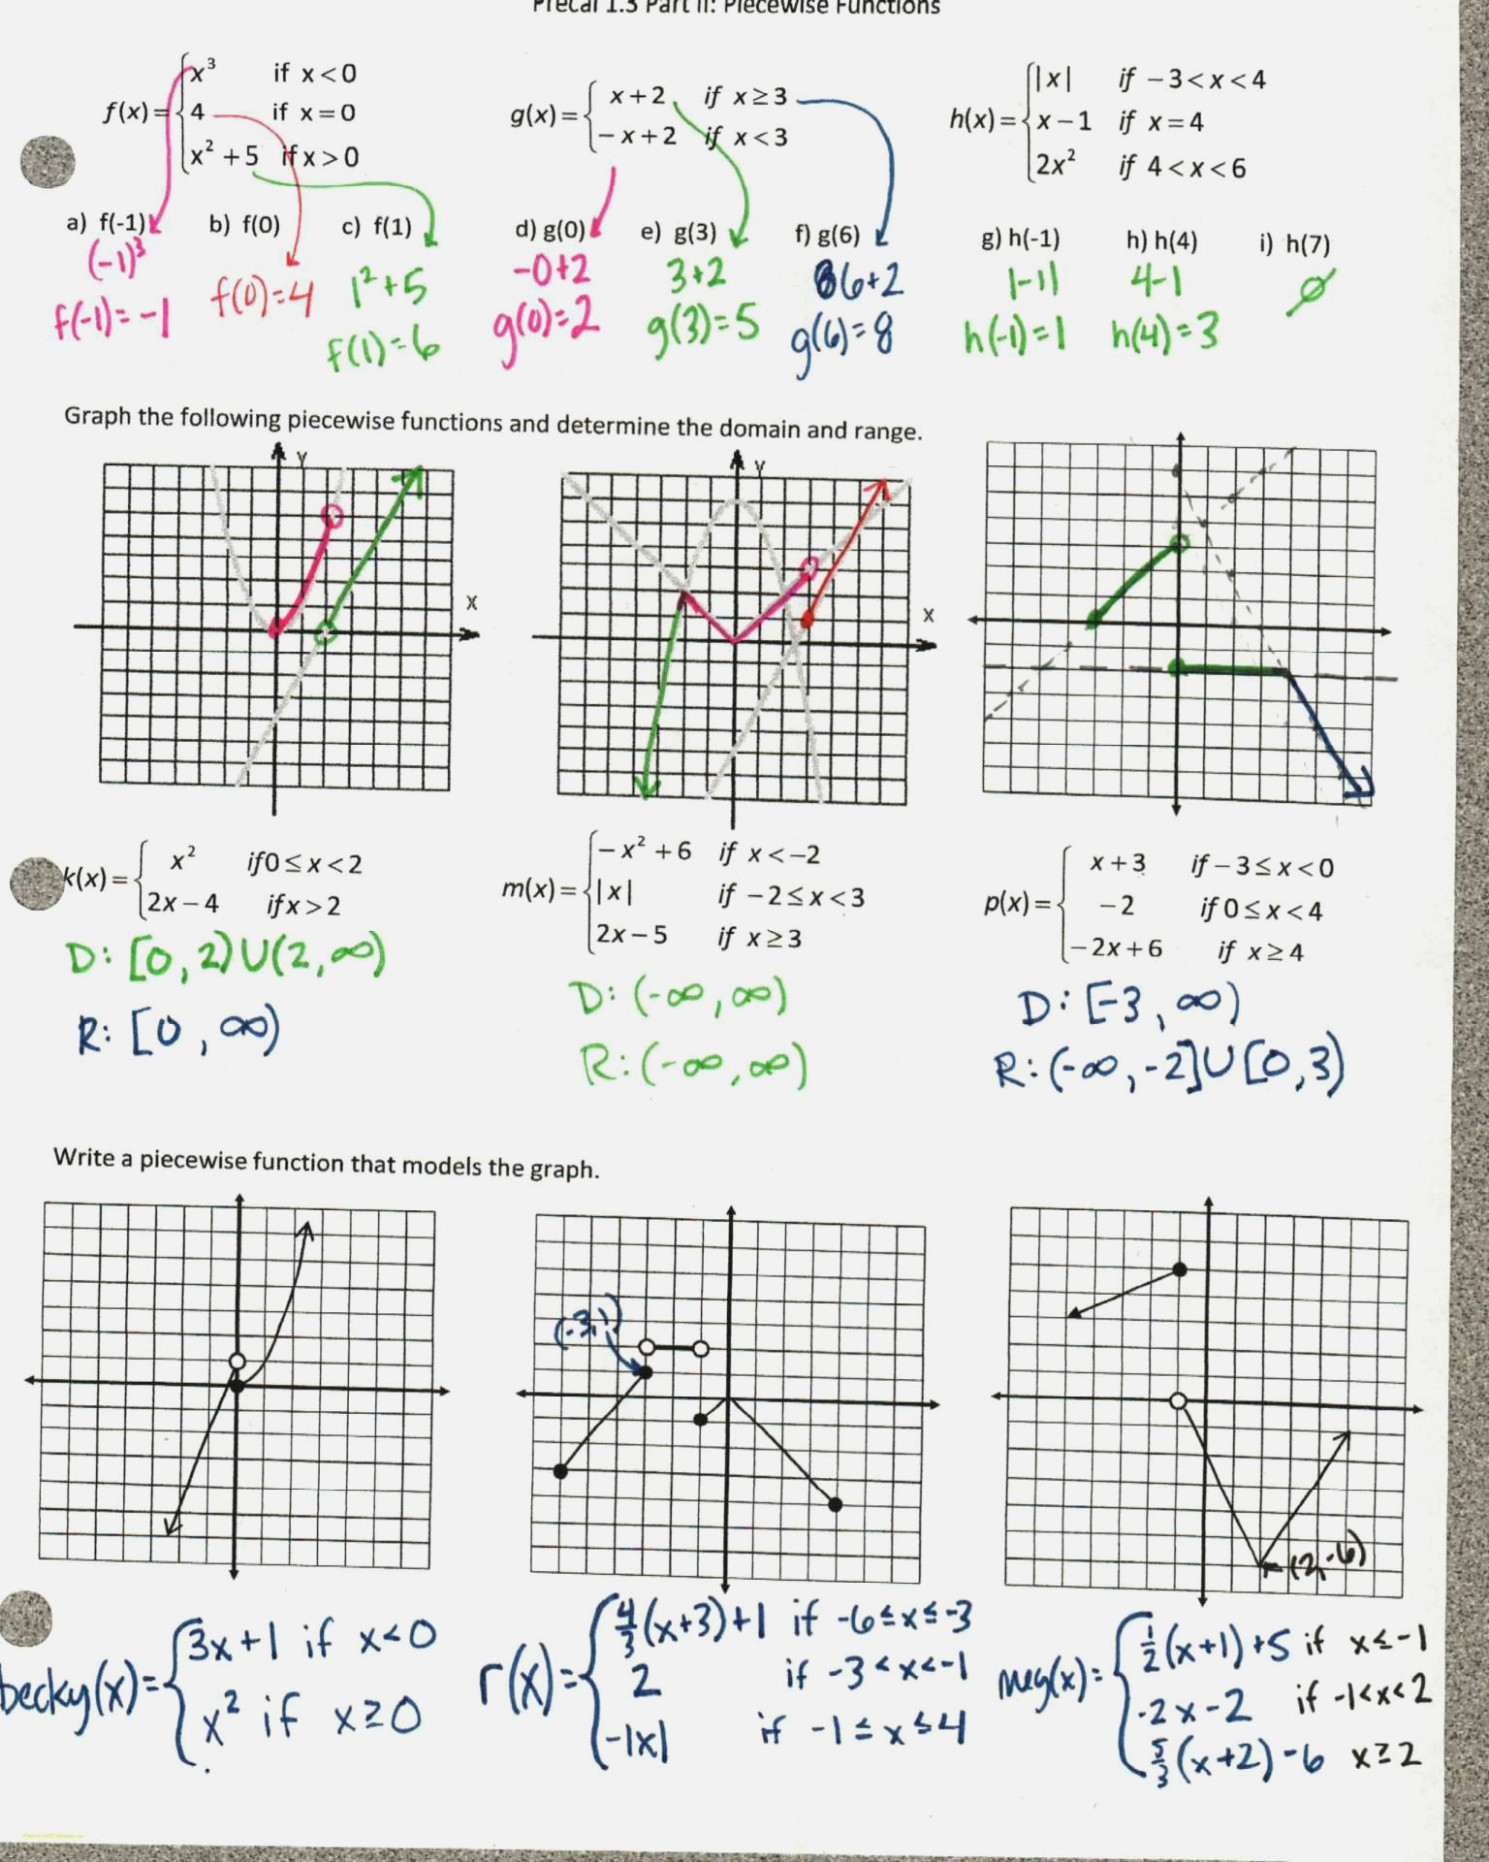 introduction to quadratic functions assignment